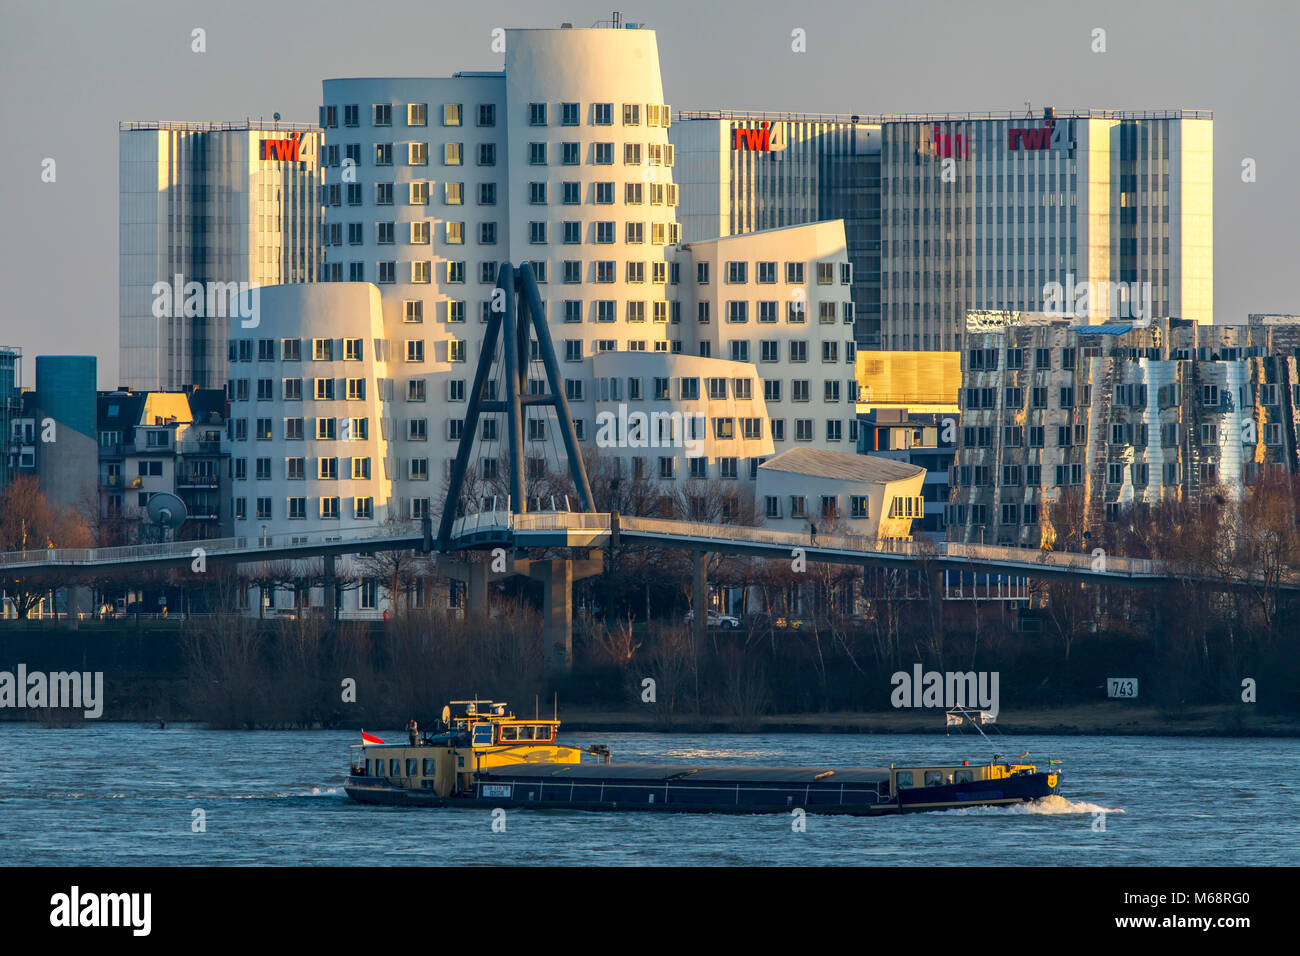 Düsseldorf, Germany, the Gehry buildings, Neuer Zollhof, in the Medienhafen, Media port district,  behind the RWI4 building complex, river Rhine, carg Stock Photo